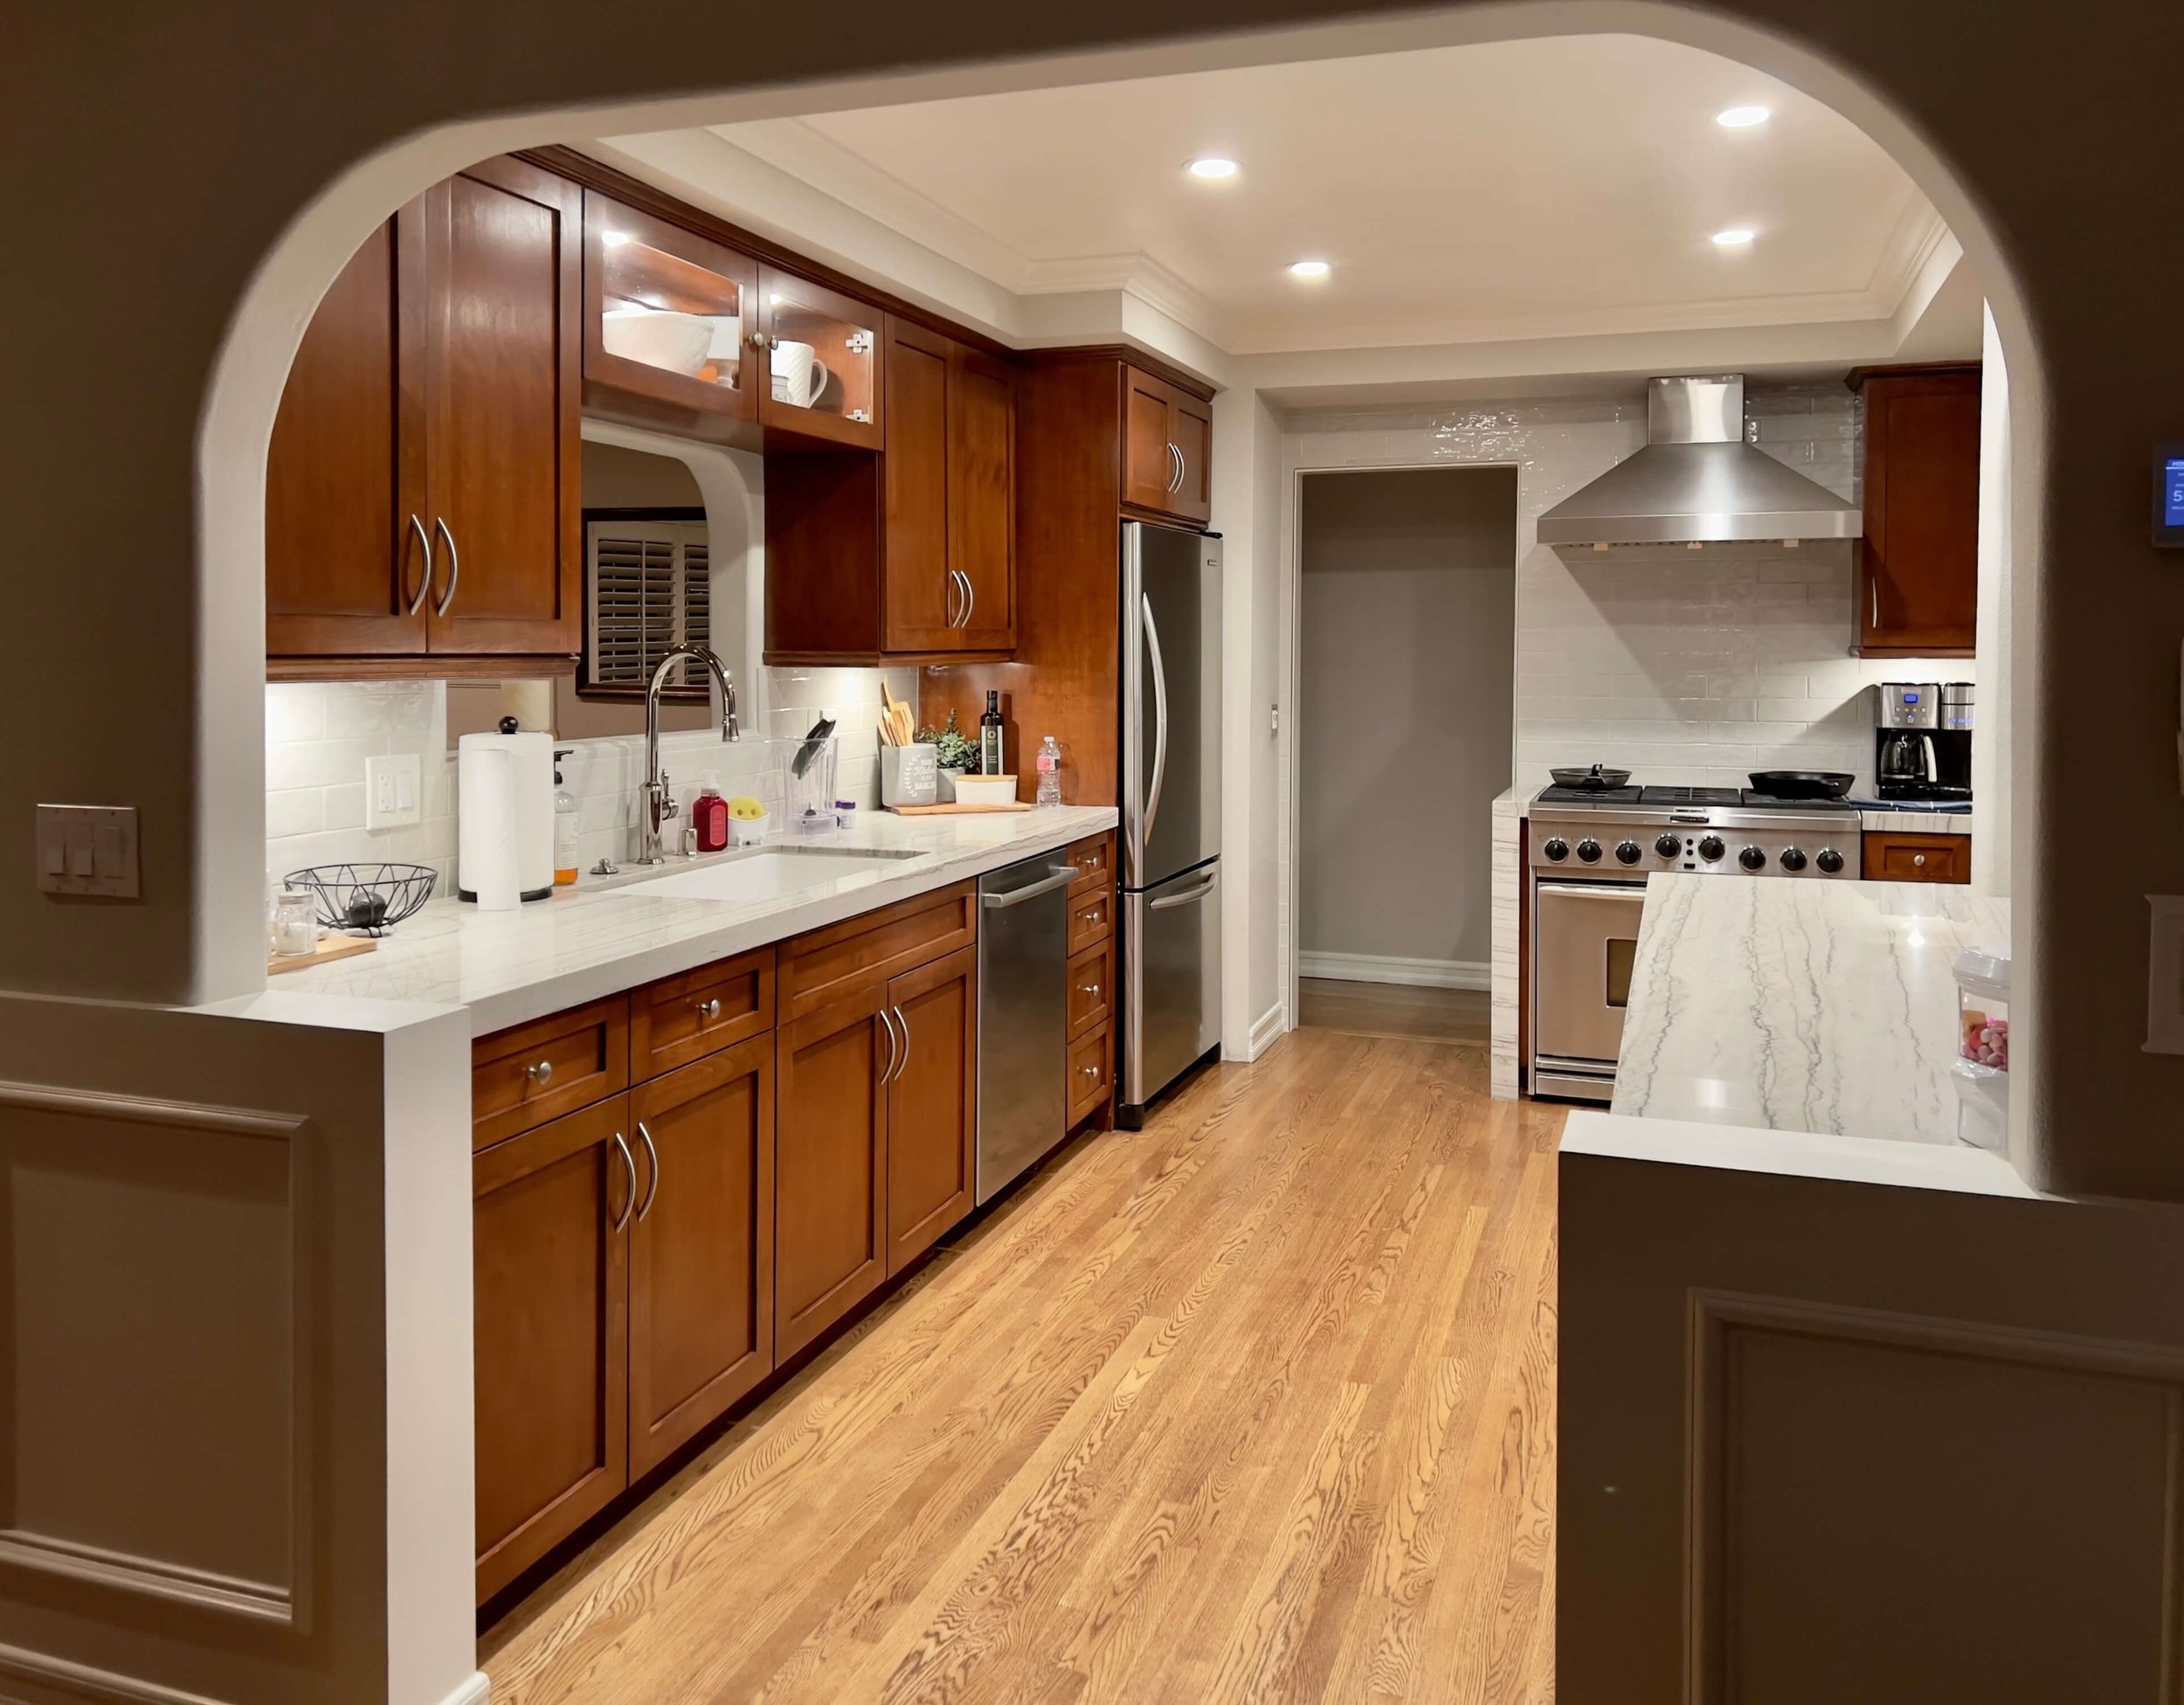 Should I Paint My Kitchen Cabinets? It Depends. — DESIGNED